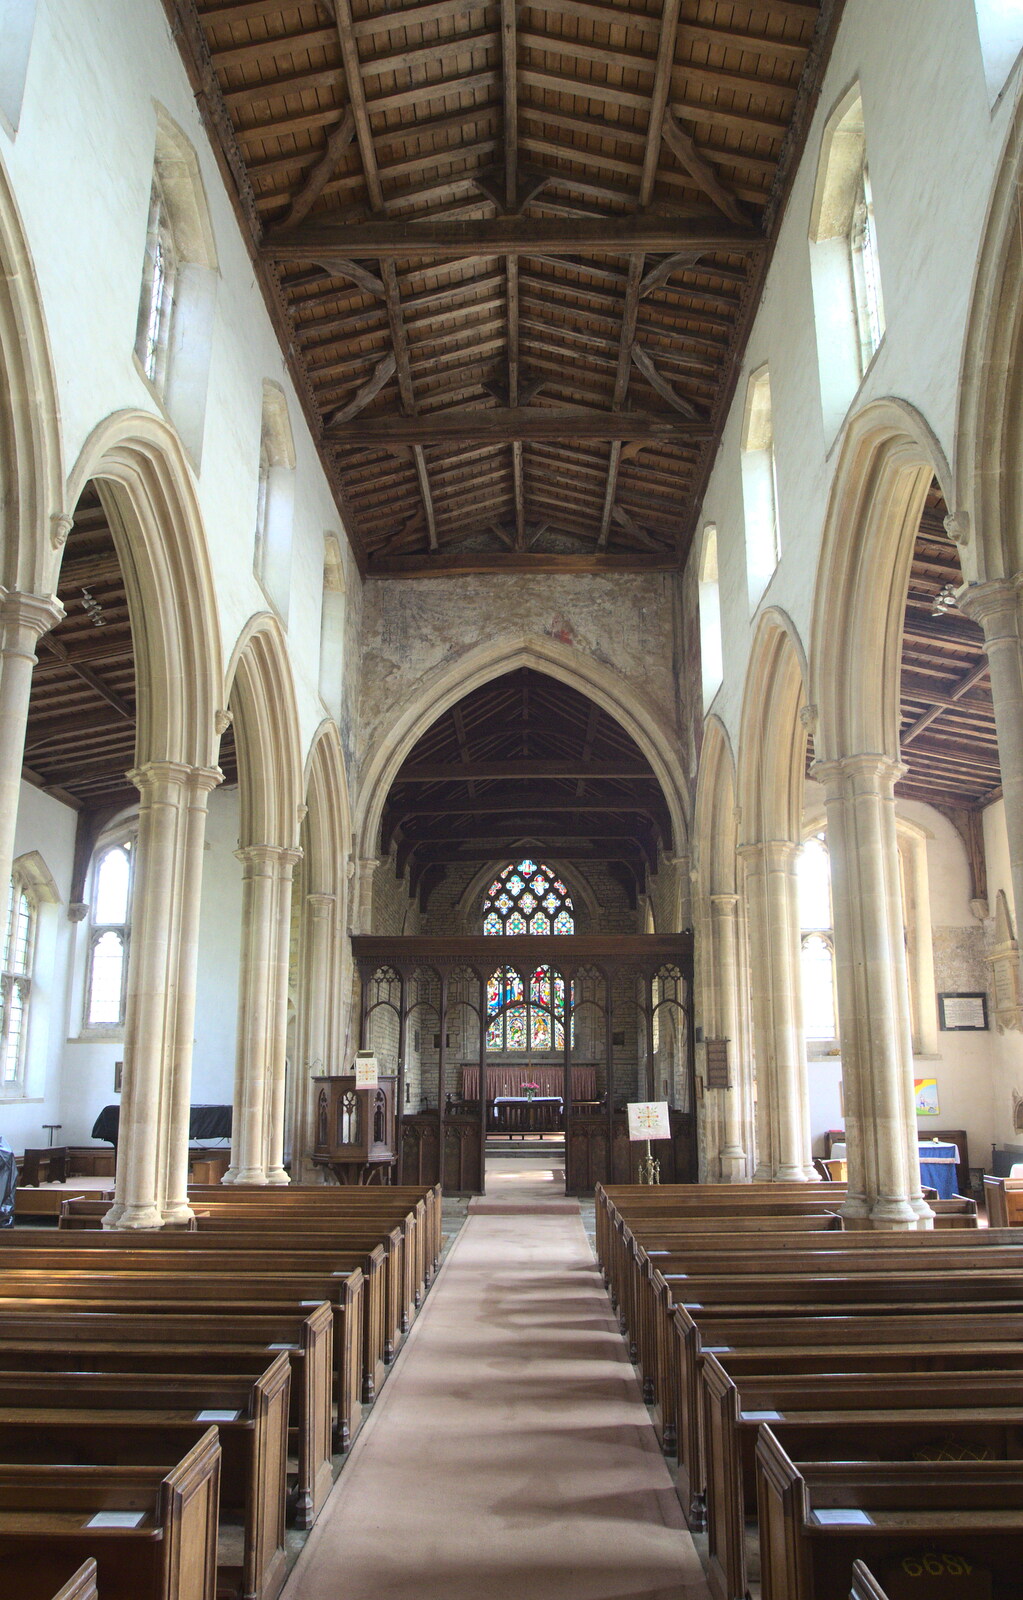 Lyddington's church nave from The BSCC Weekend Away, Lyddington, Rutland - 9th May 2015